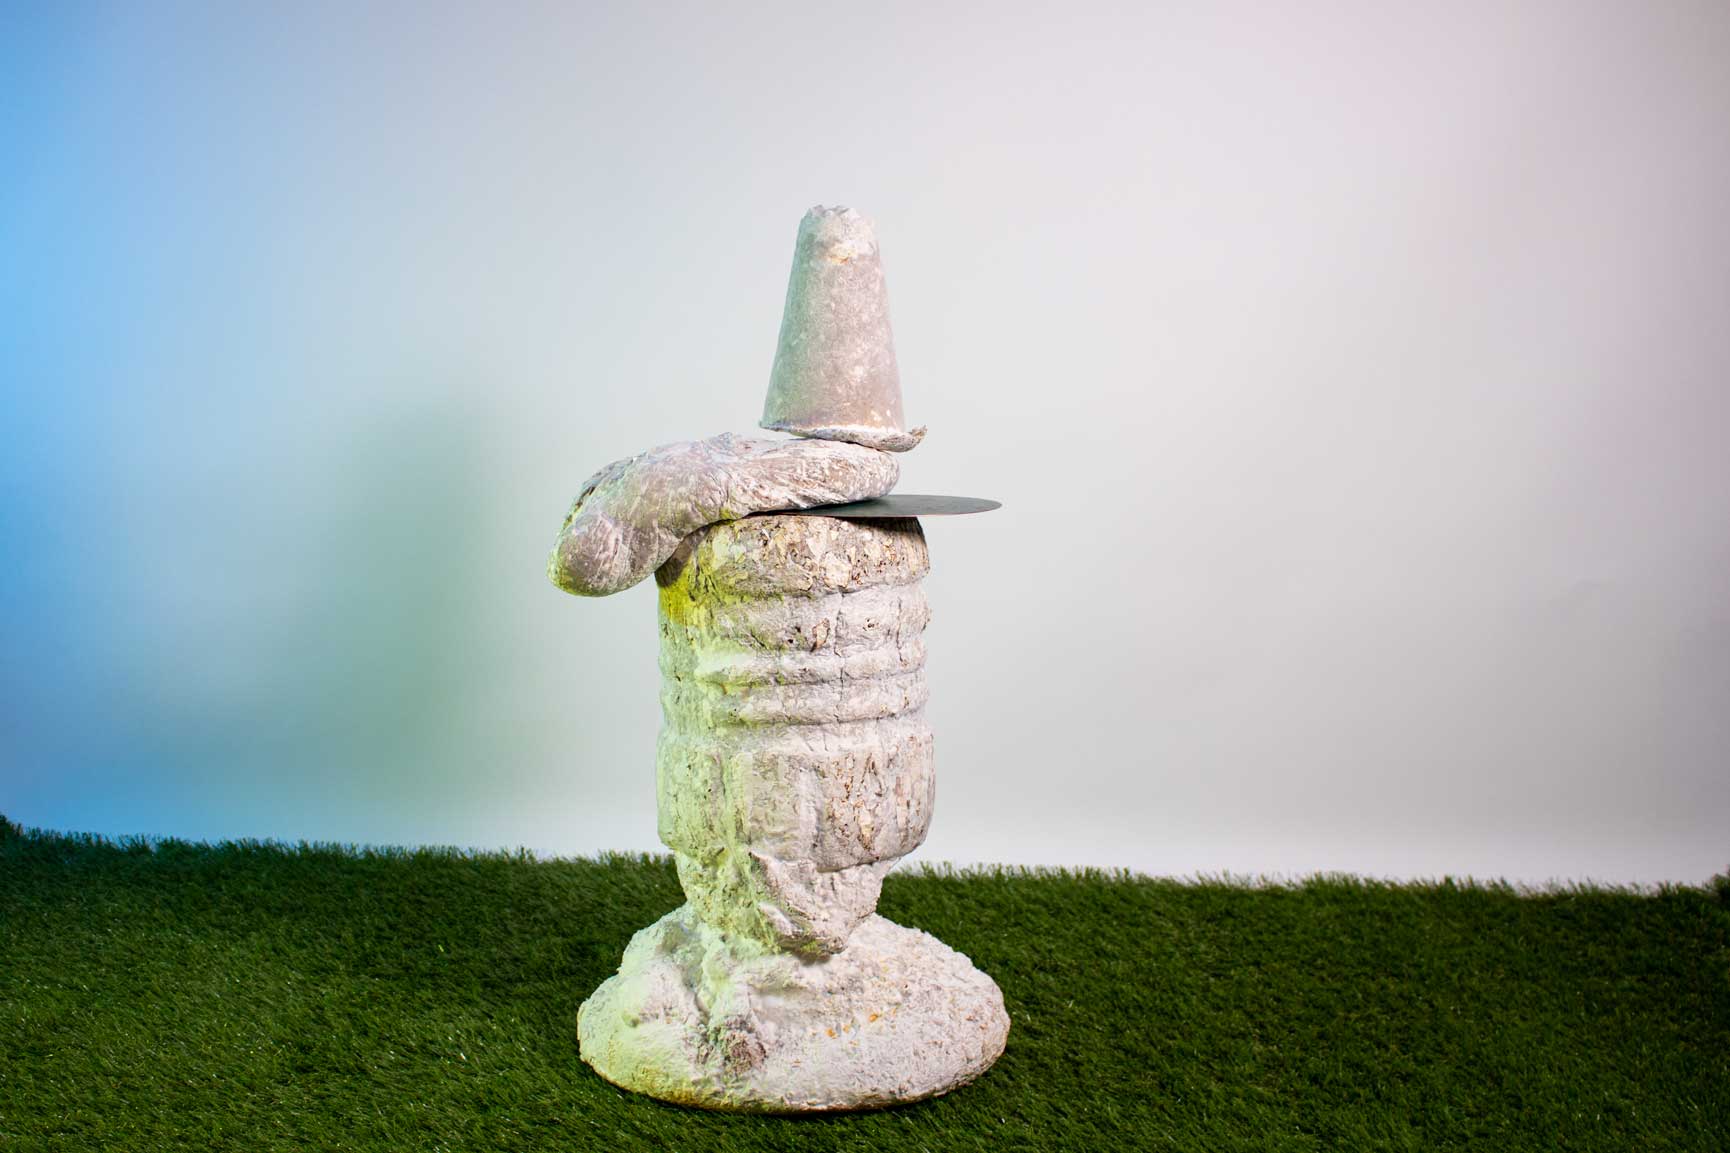 A white/cream textured, organic sculpture sits on faux grass in front of a white wall.